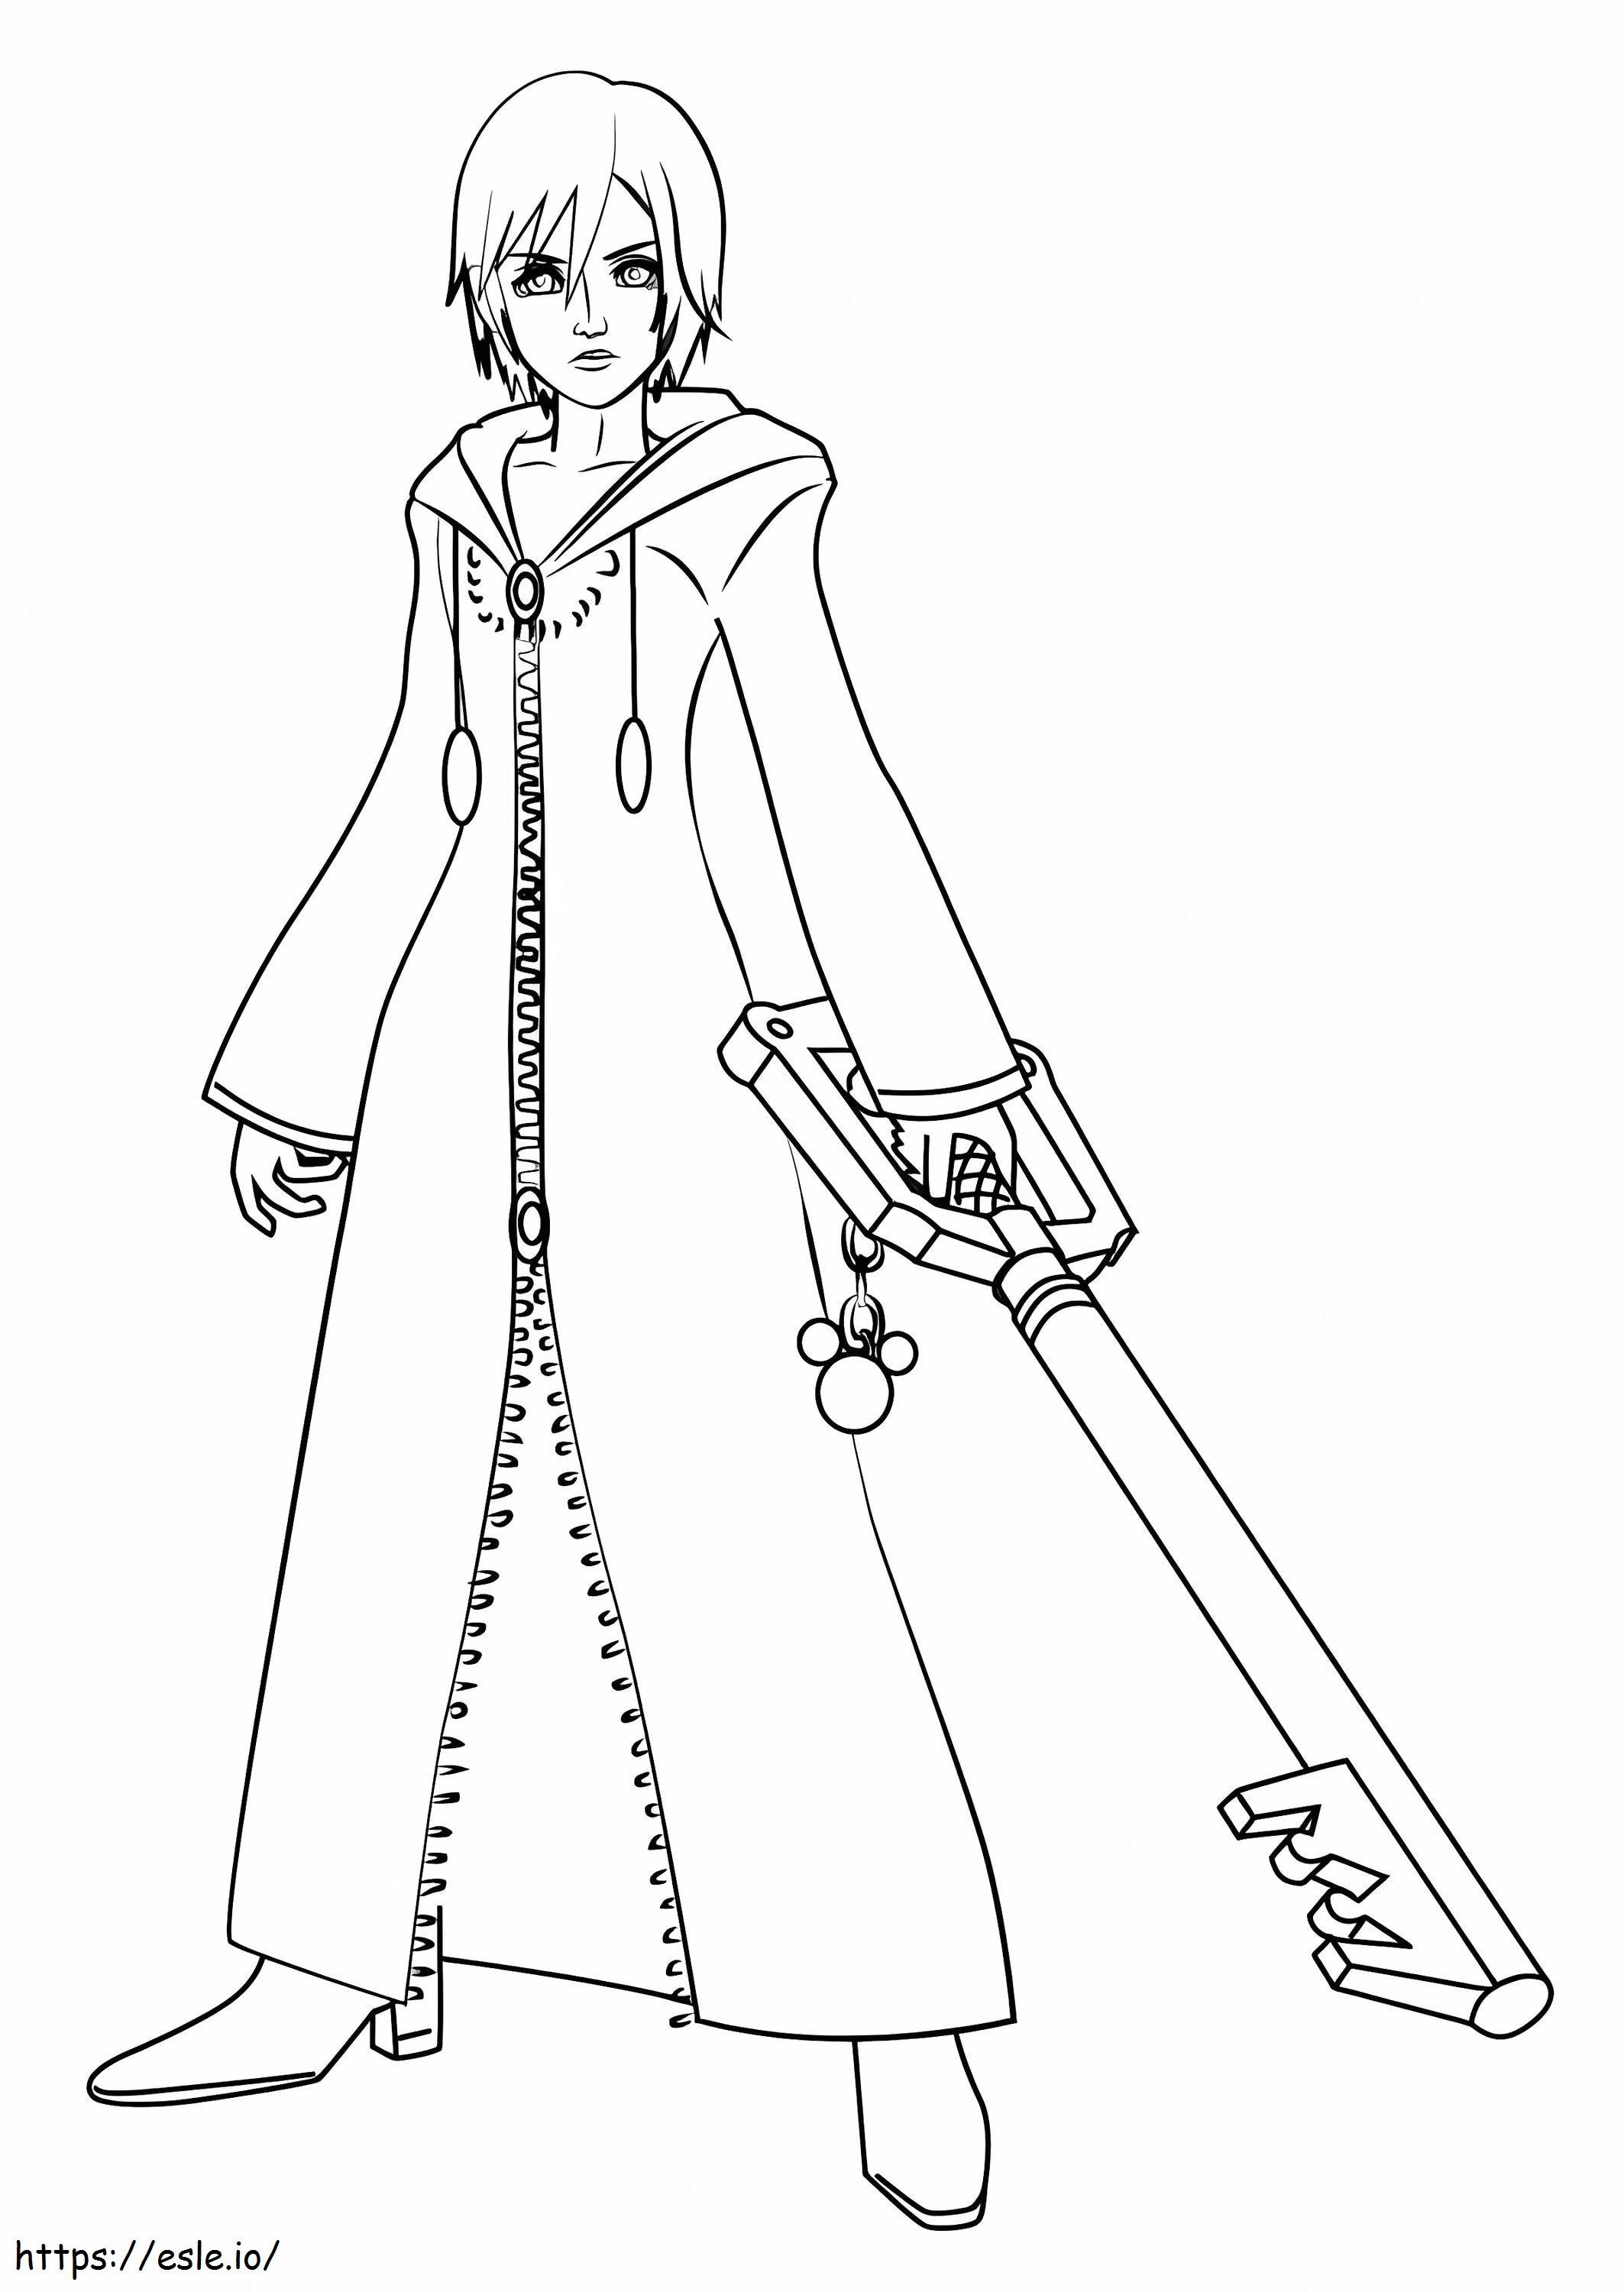 Xion From Kingdom Hearts coloring page